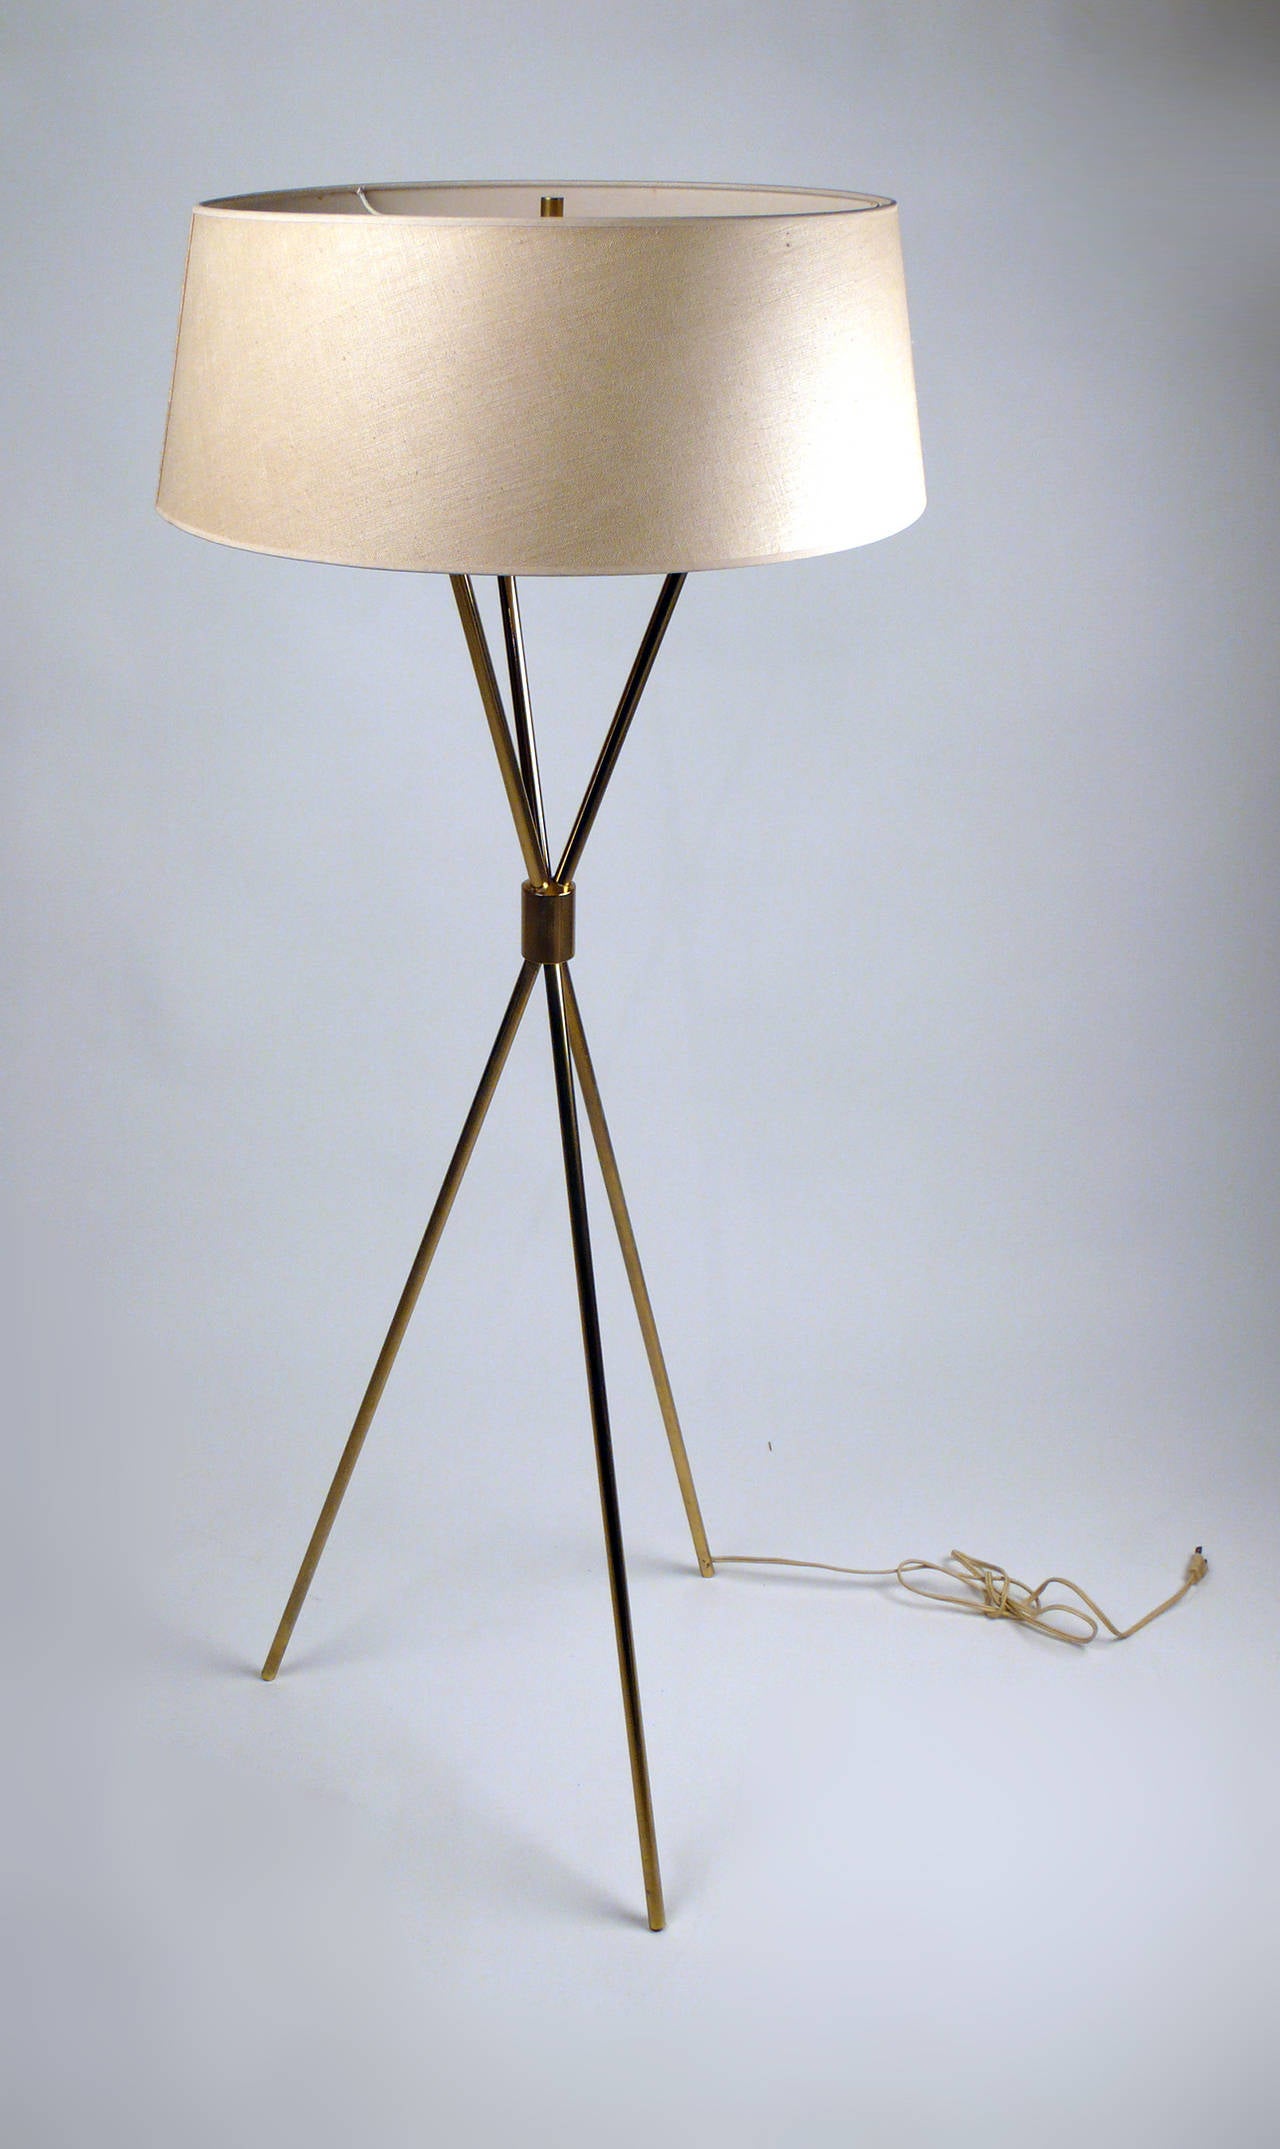 Early 1950s brass tripod floor lamp by T.H. Robsjohn-Gibbings for Hansen retains the original shade and functions as intended.